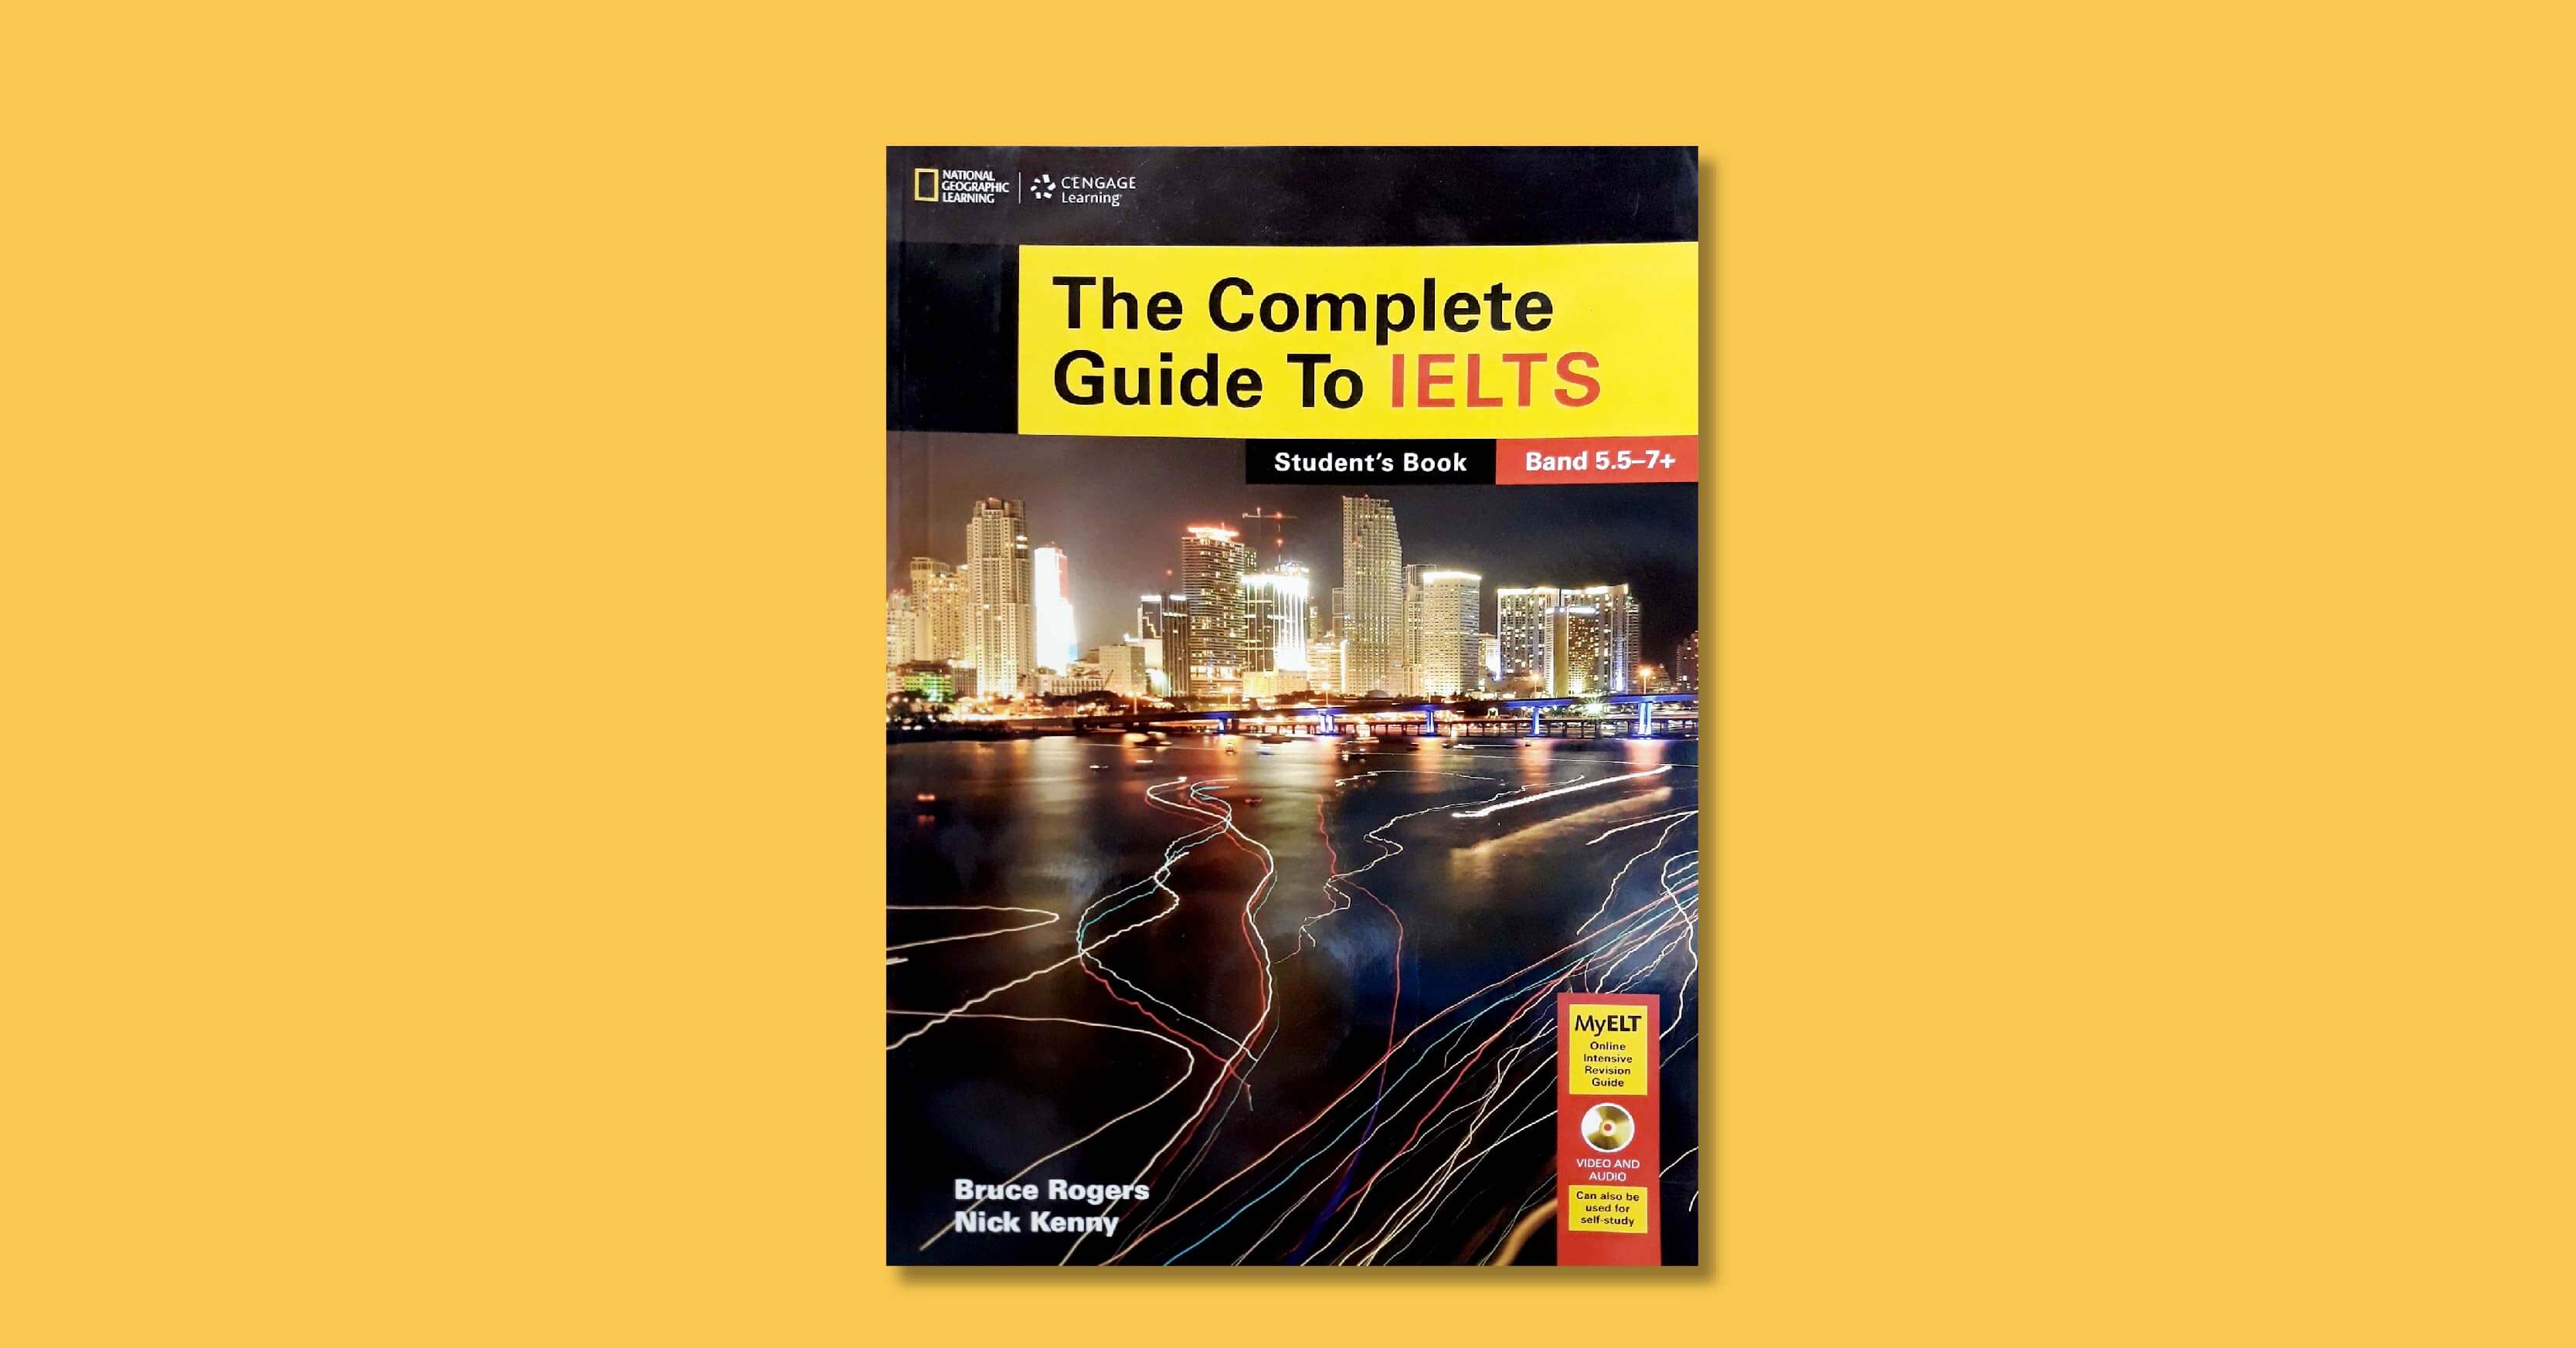 review-va-huong-dan-su-dung-sach-the-complete-guide-to-ielts